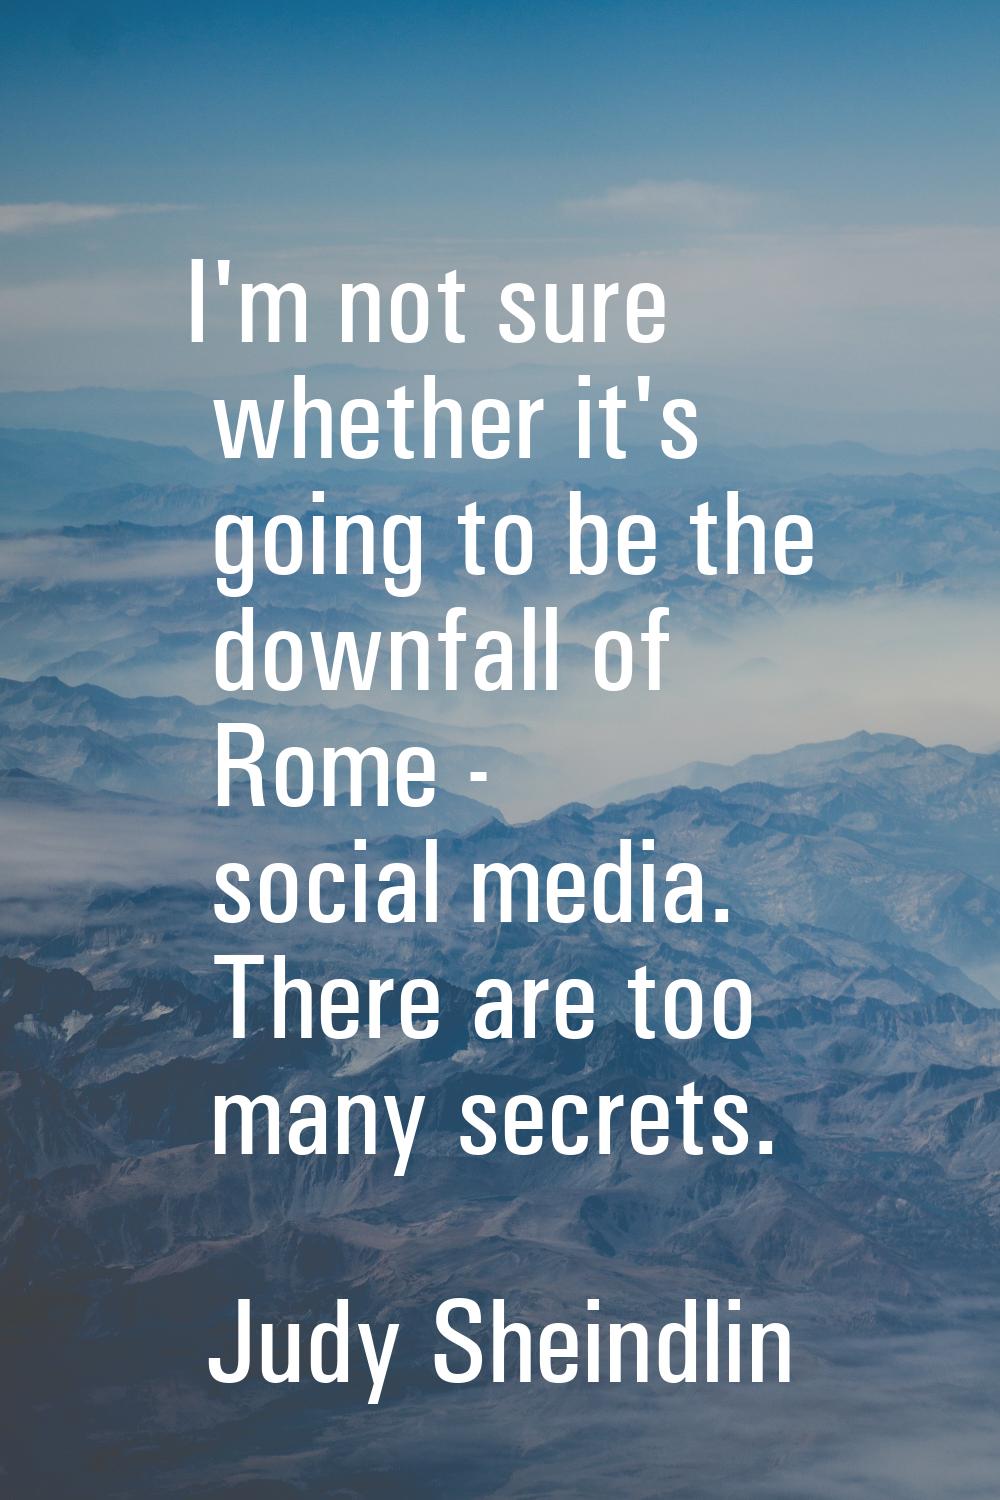 I'm not sure whether it's going to be the downfall of Rome - social media. There are too many secre